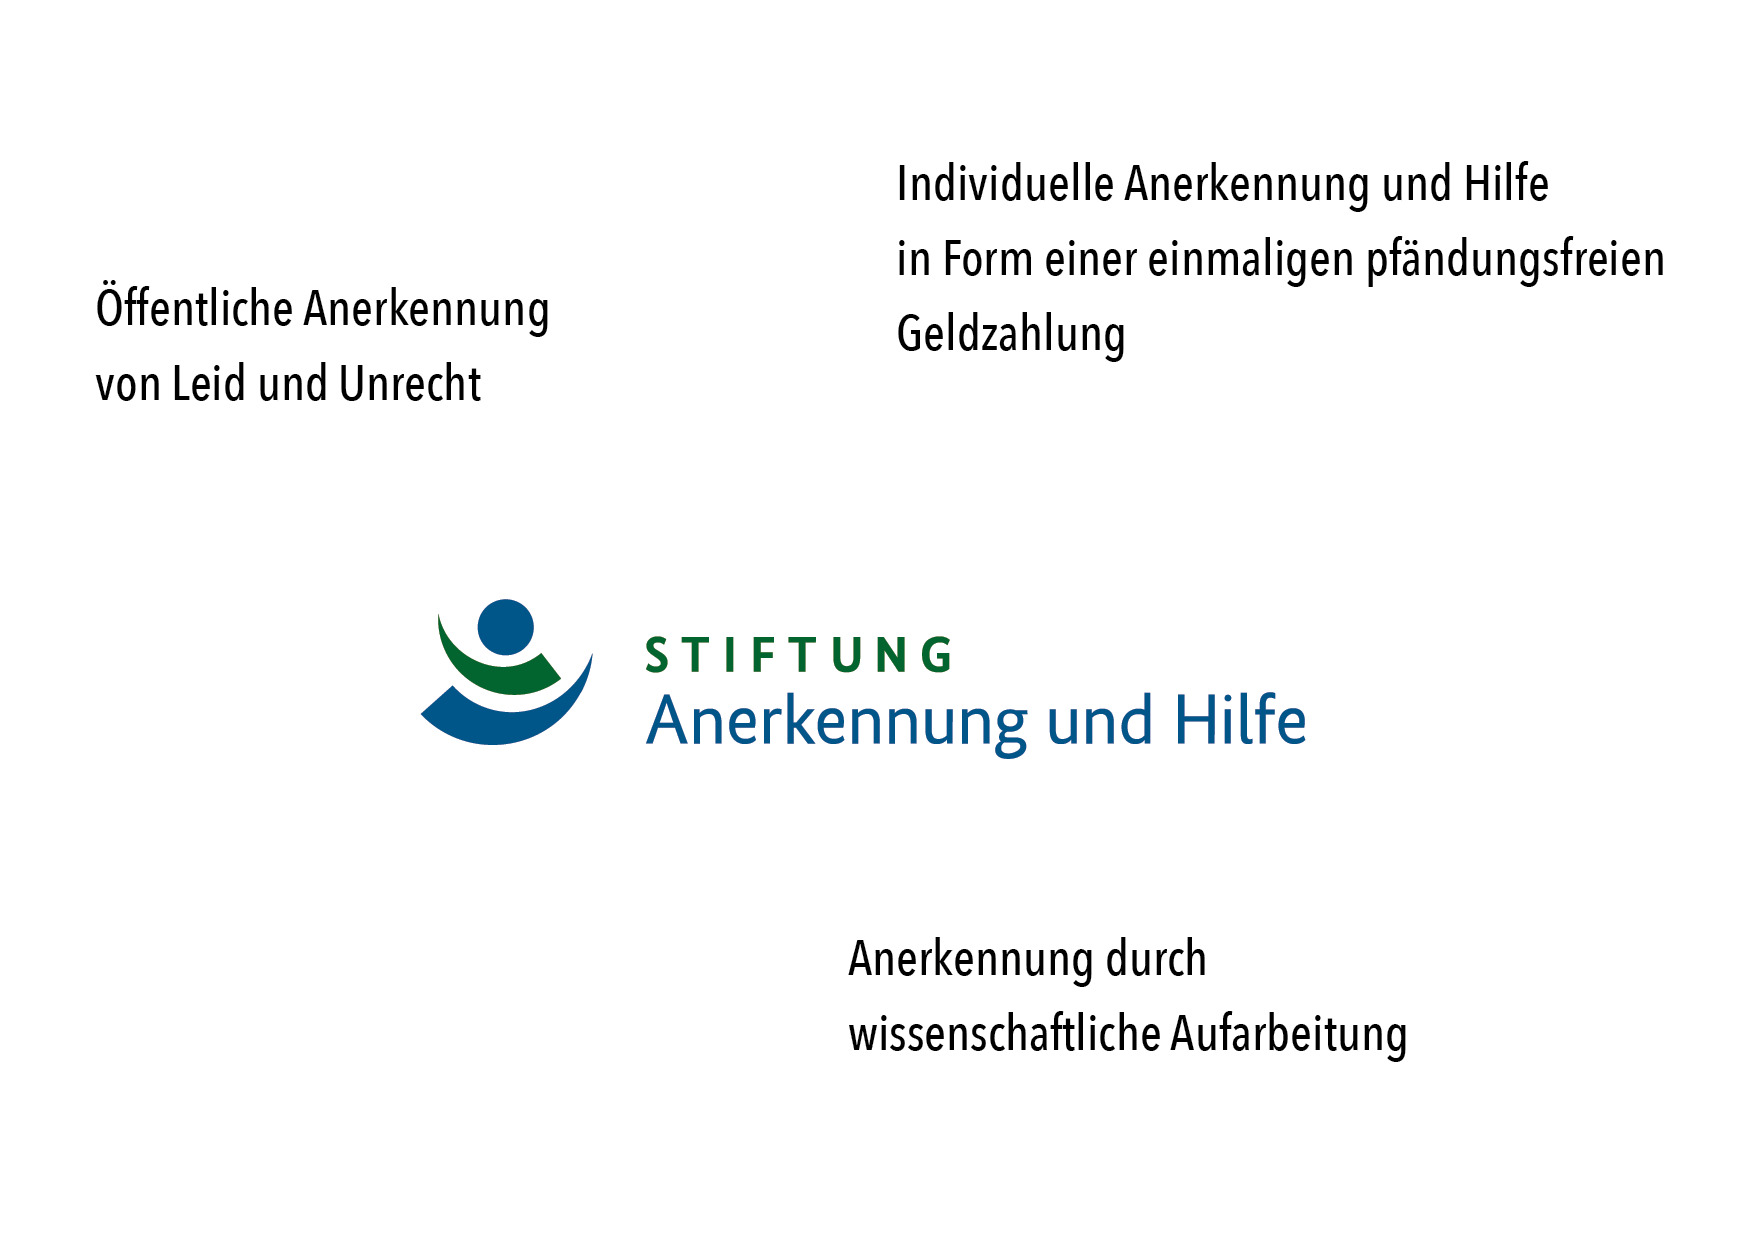 T13_1_Stiftung.png